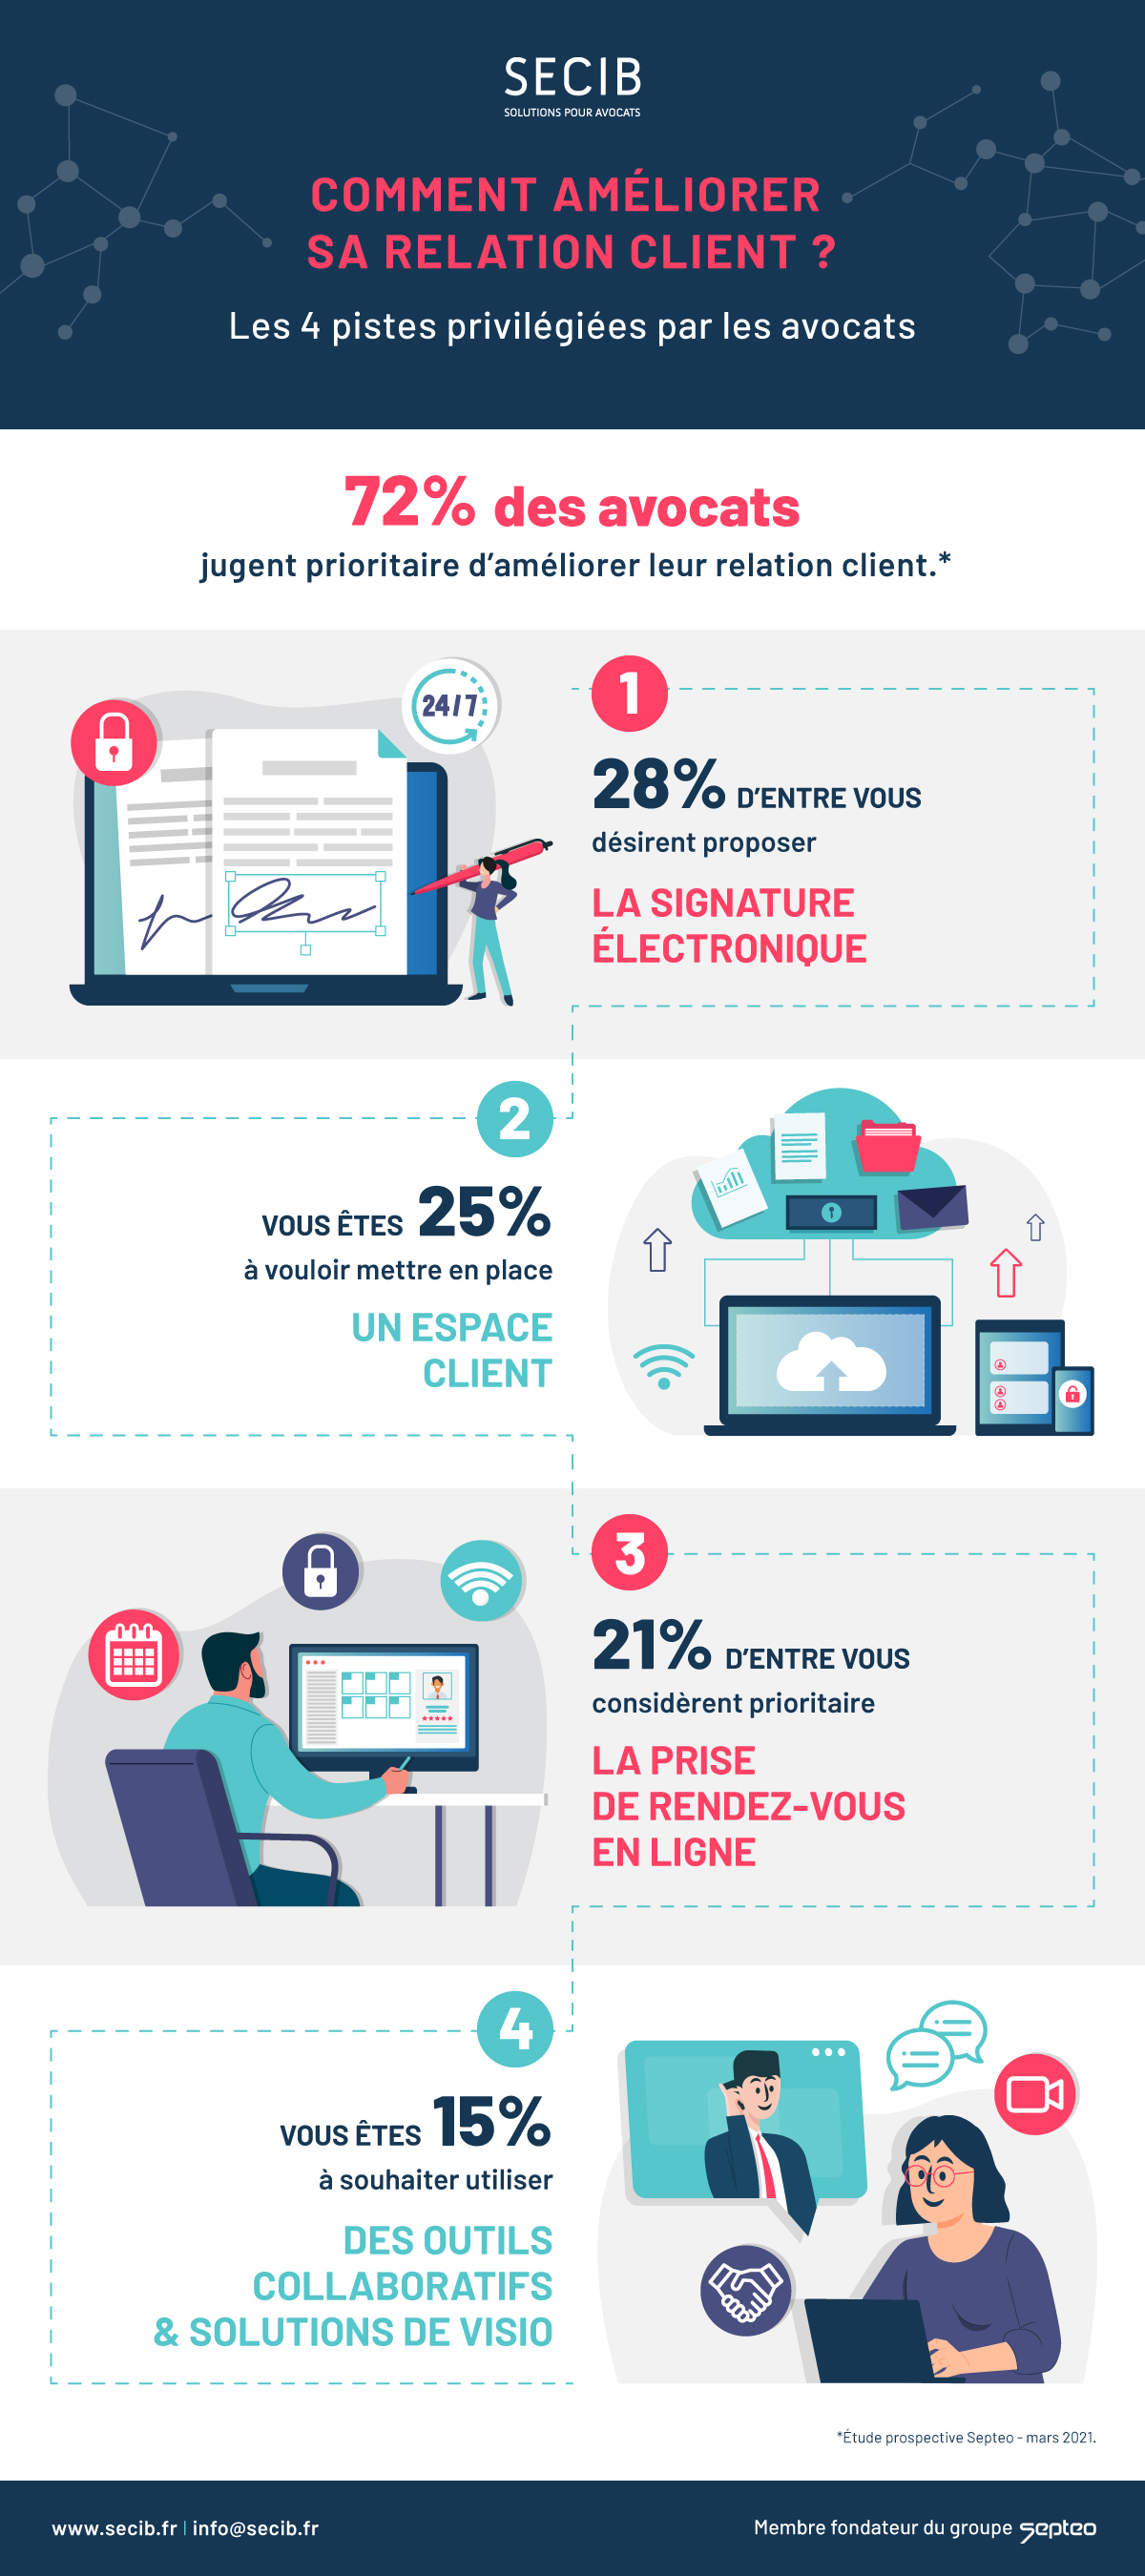 infographie-ameliorer-relation-clients-avocats.jpg